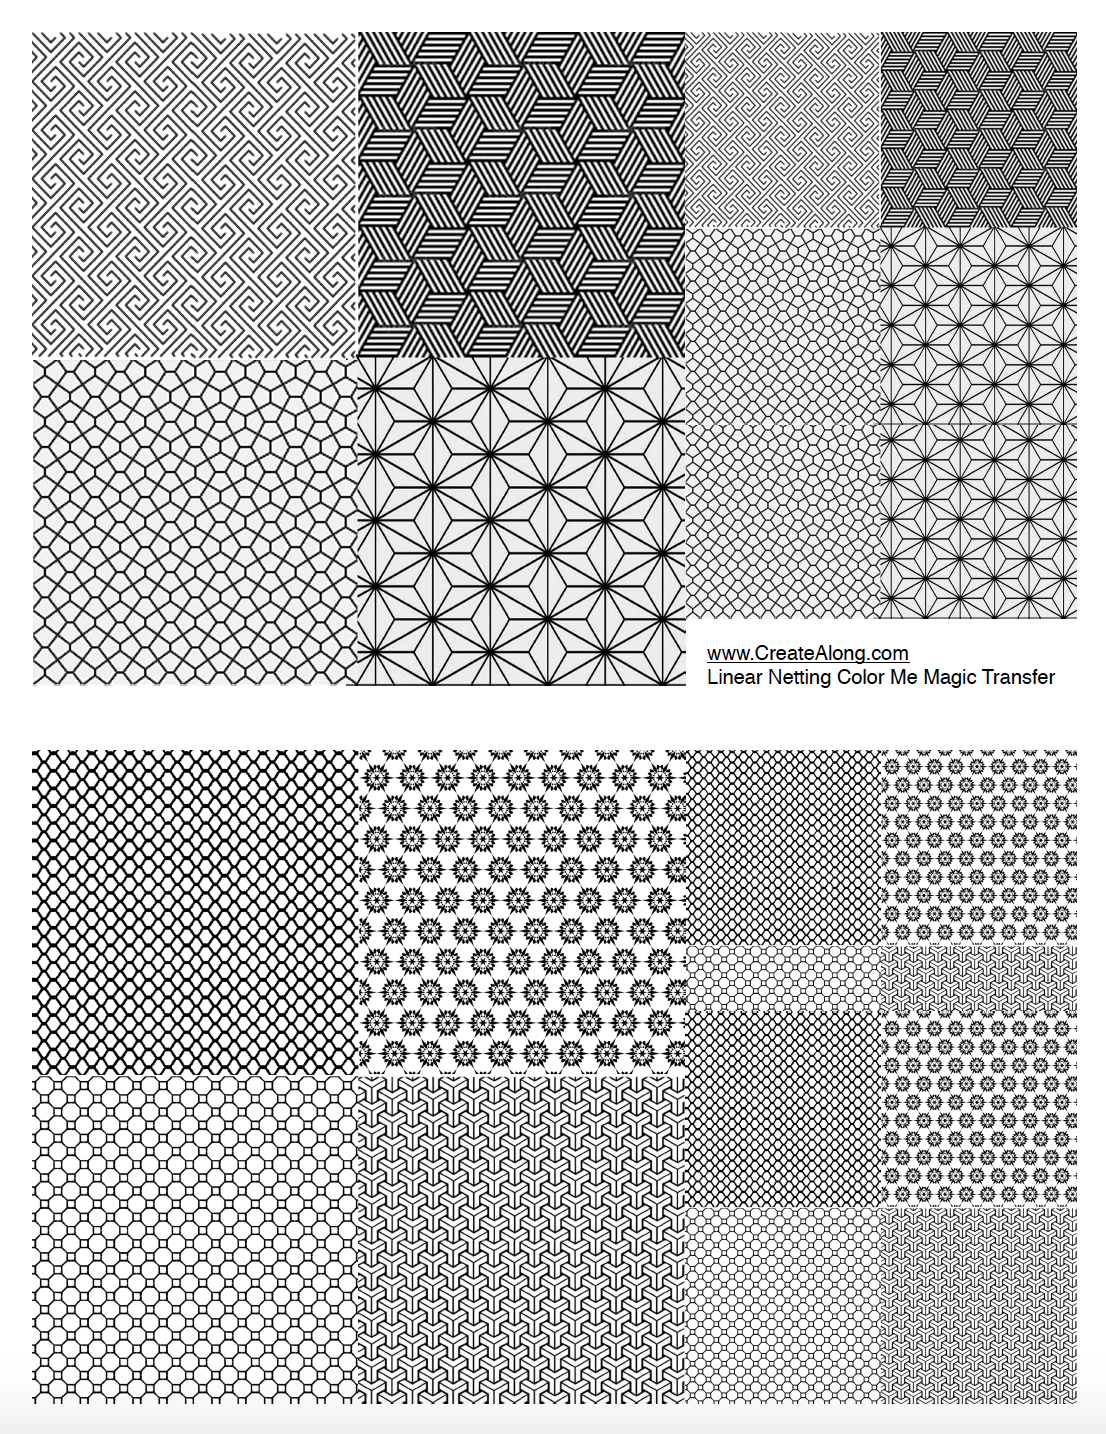 Digital Linear Netting Image Transfer PDF for creating images on raw polymer clay and for use with Magic Transfer Paper